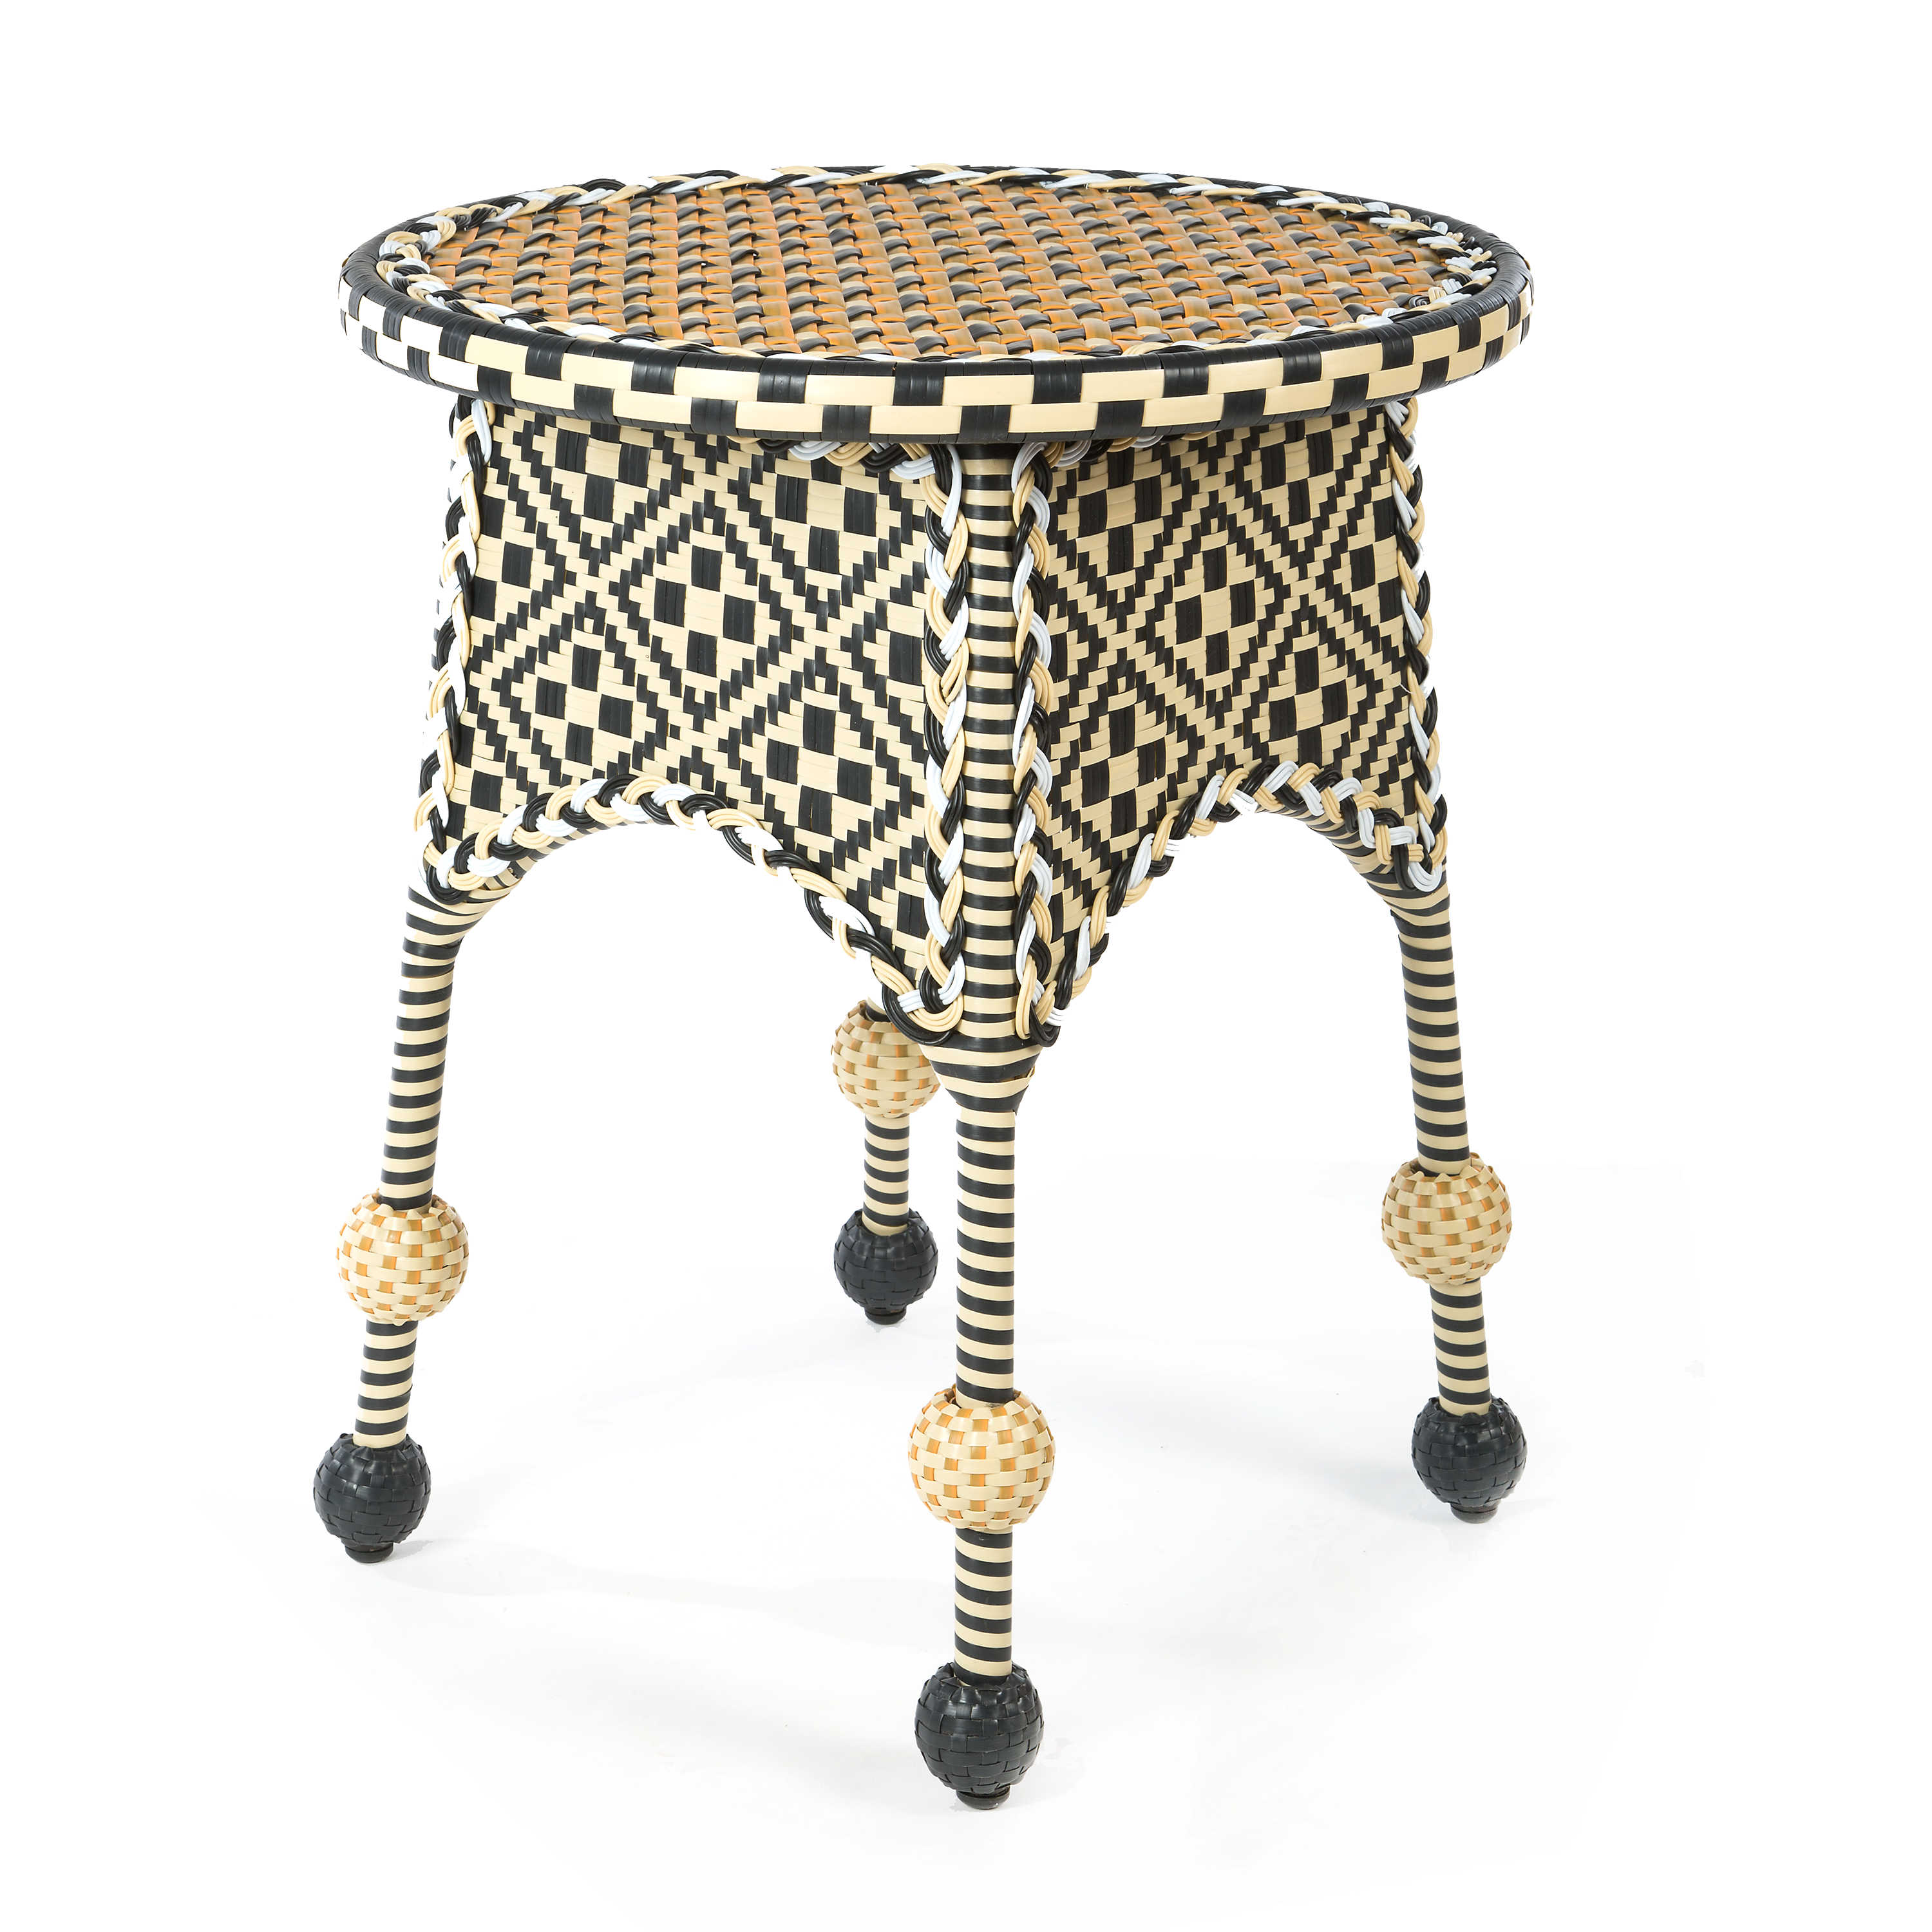 Courtyard Outdoor End Table mackenzie-childs Panama 0